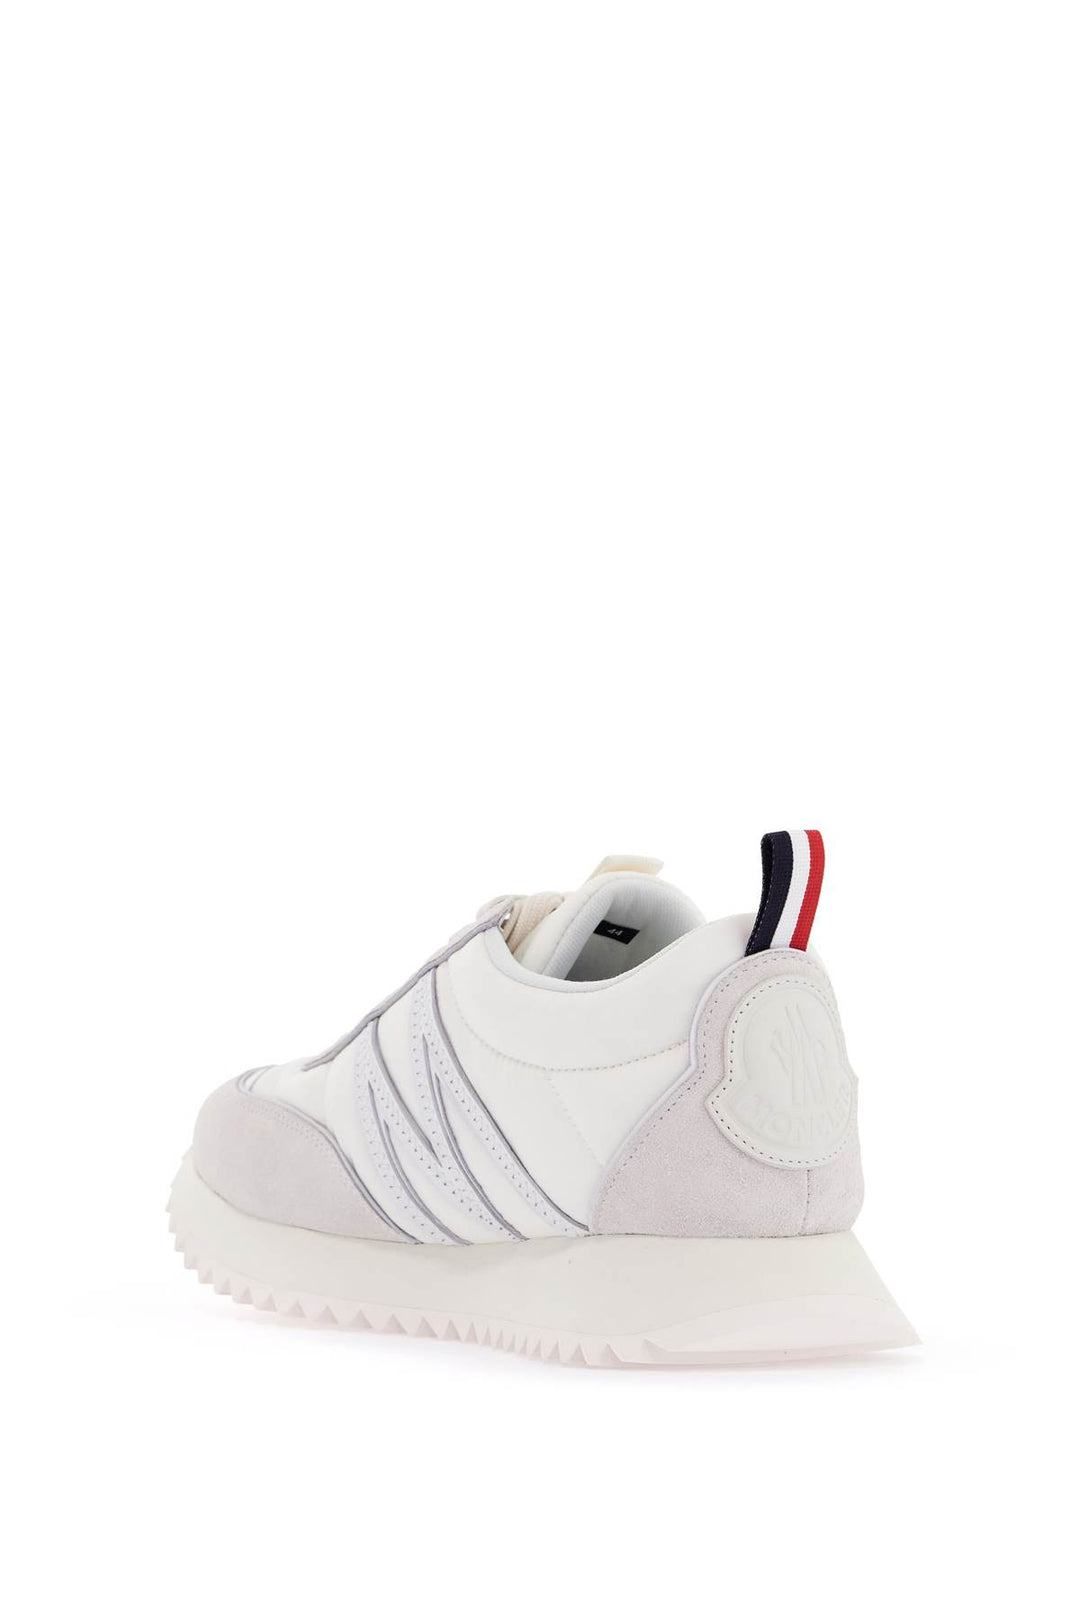 Moncler Pacey Sneakers   White